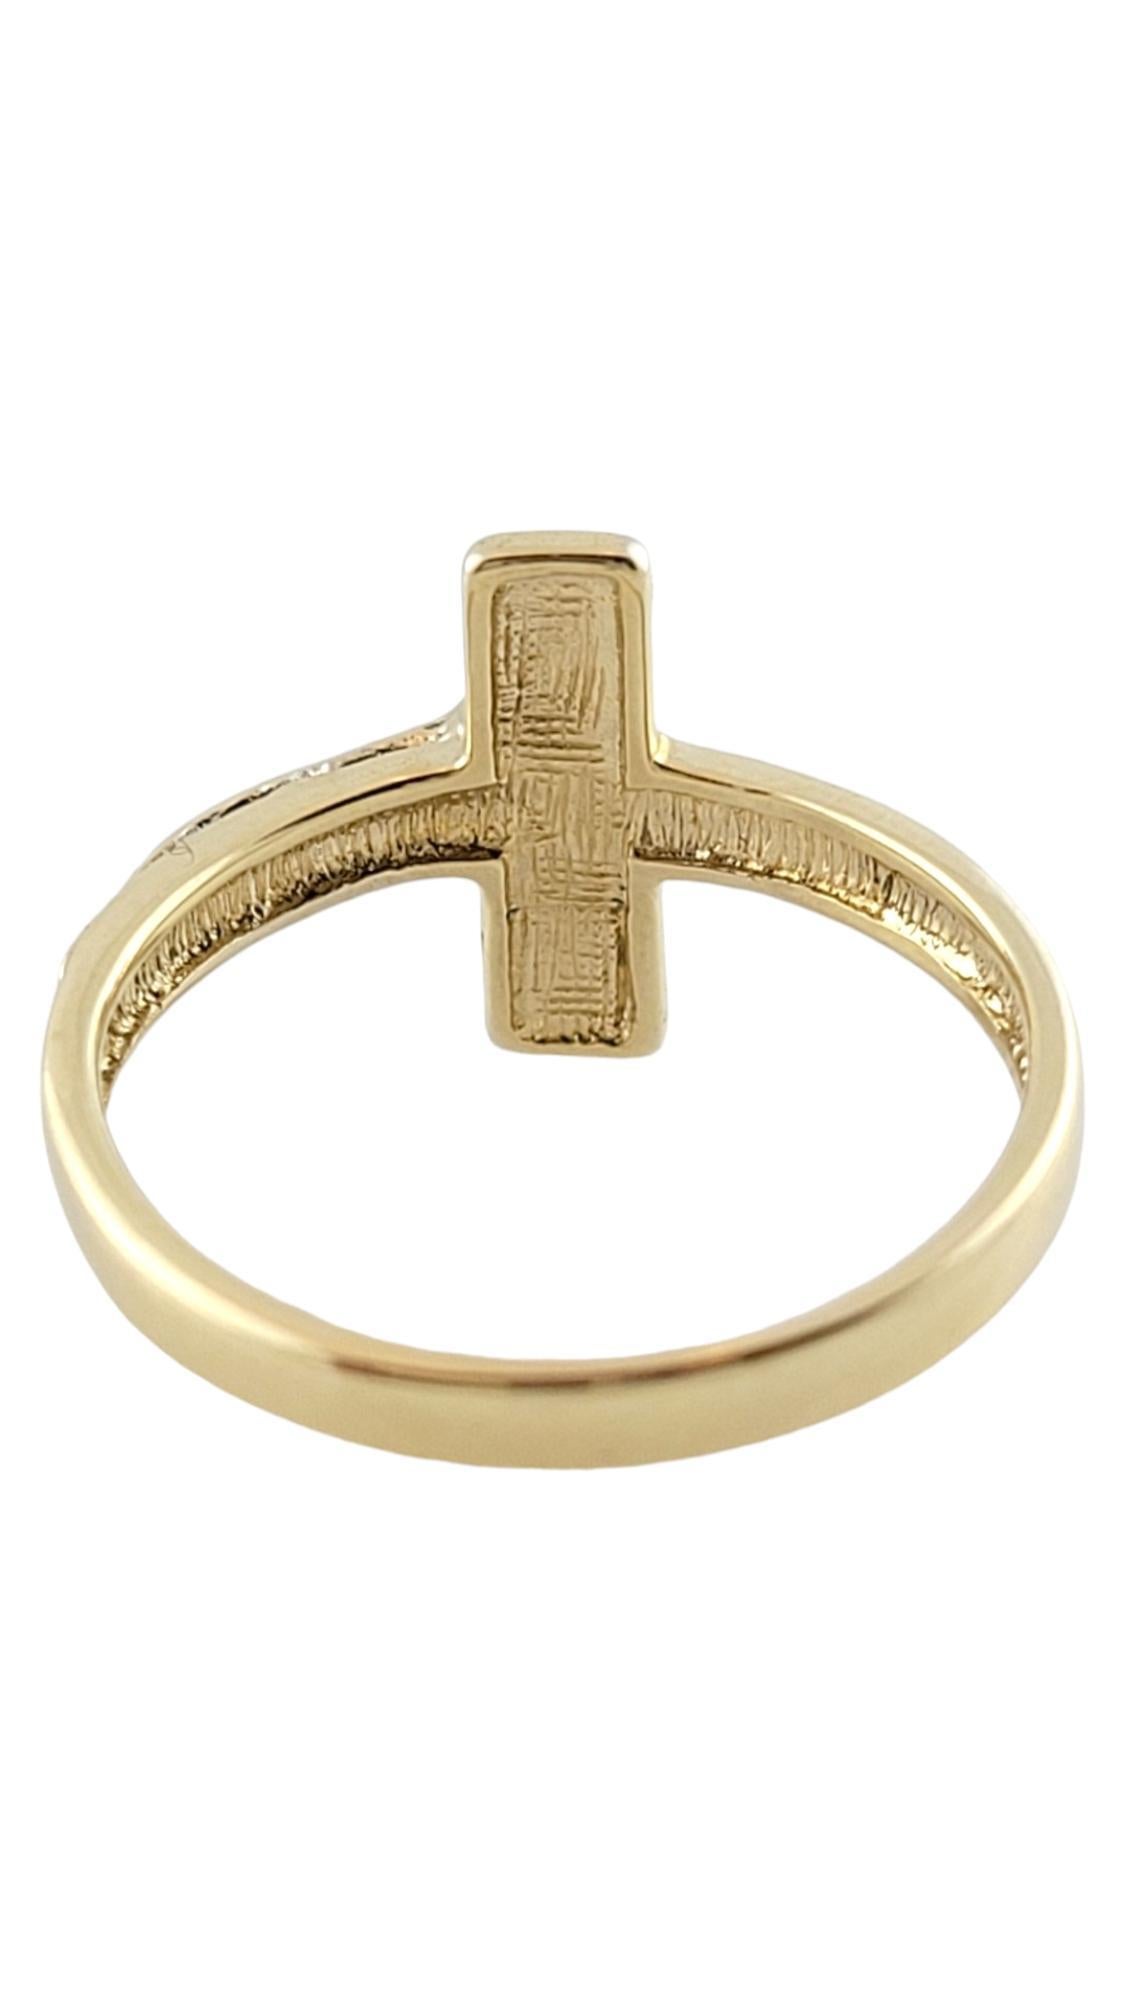 Women's 14K Yellow Gold Cross Ring Size 6.5 #16200 For Sale